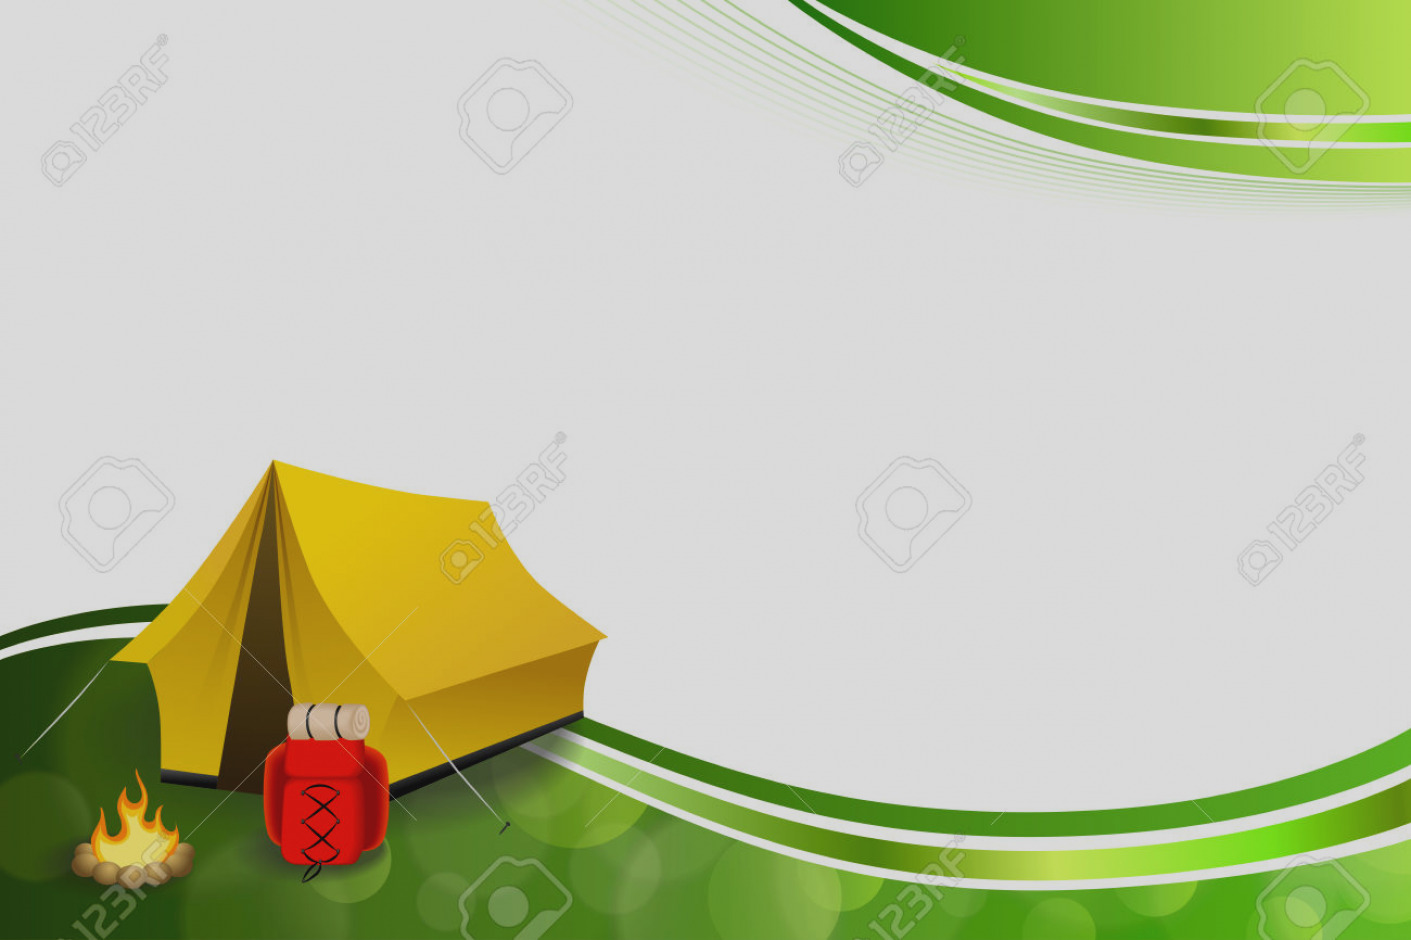 Download Camping clipart background, Camping background Transparent ...